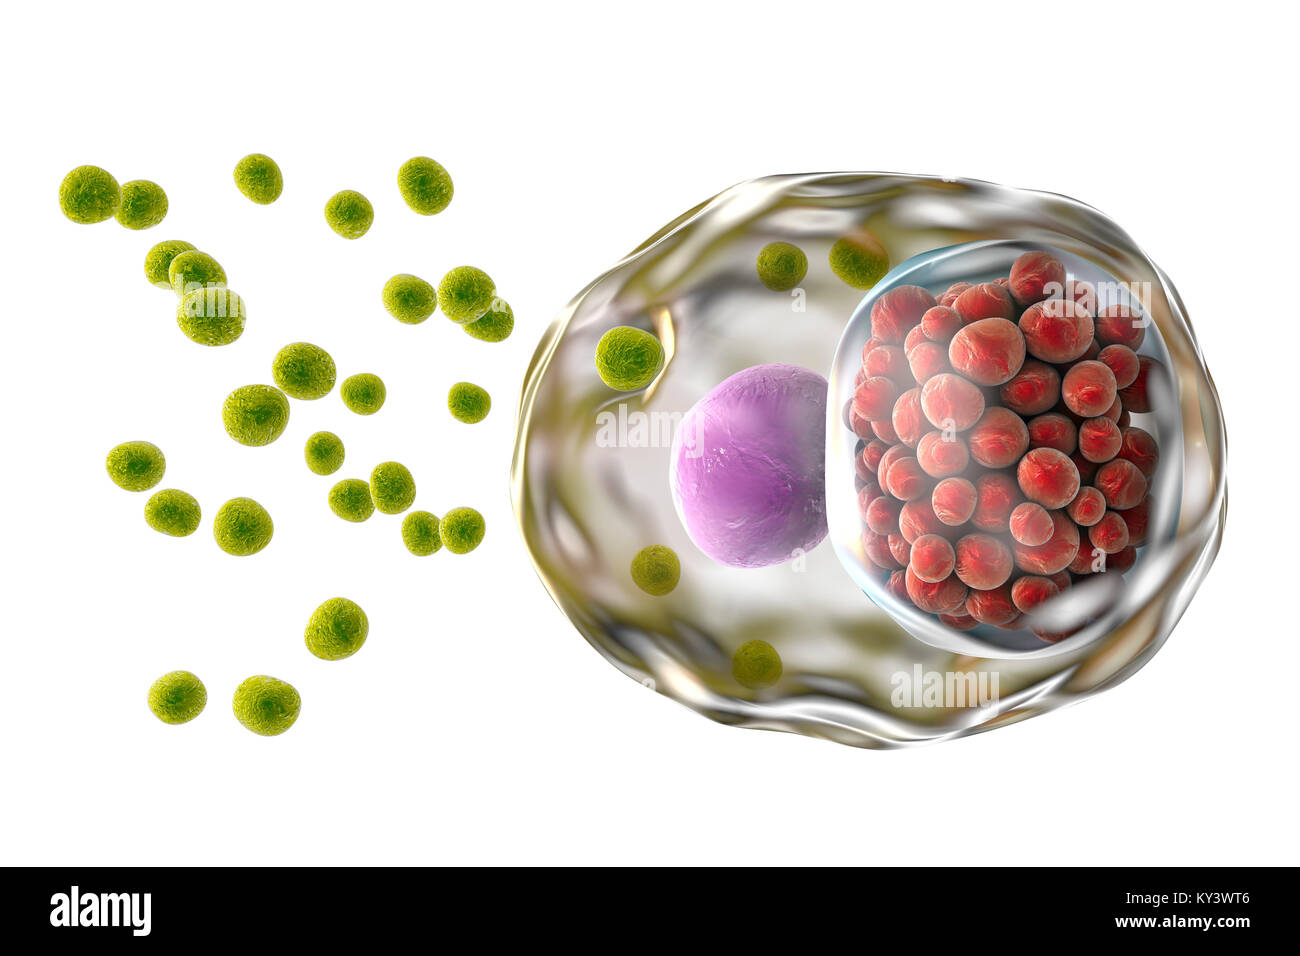 Chlamydia infection. Computer illustration of a cell infected with Chlamydia trachomatis bacteria. Elementary bodies (EBs, small green spheres), the non-replicating infectious form of the bacteria are seen outside the host cell. EBs infect the cell and are transformed into reticulate bodies (RB), which are replicating form. RBs are seen as a group of small red spheres near the nucleus (purple) of the cell. Chlamydia is a sexually transmitted infection that can go undetected causing infertility. It also causes the eye disease trachoma, which can lead to blindness. Stock Photo